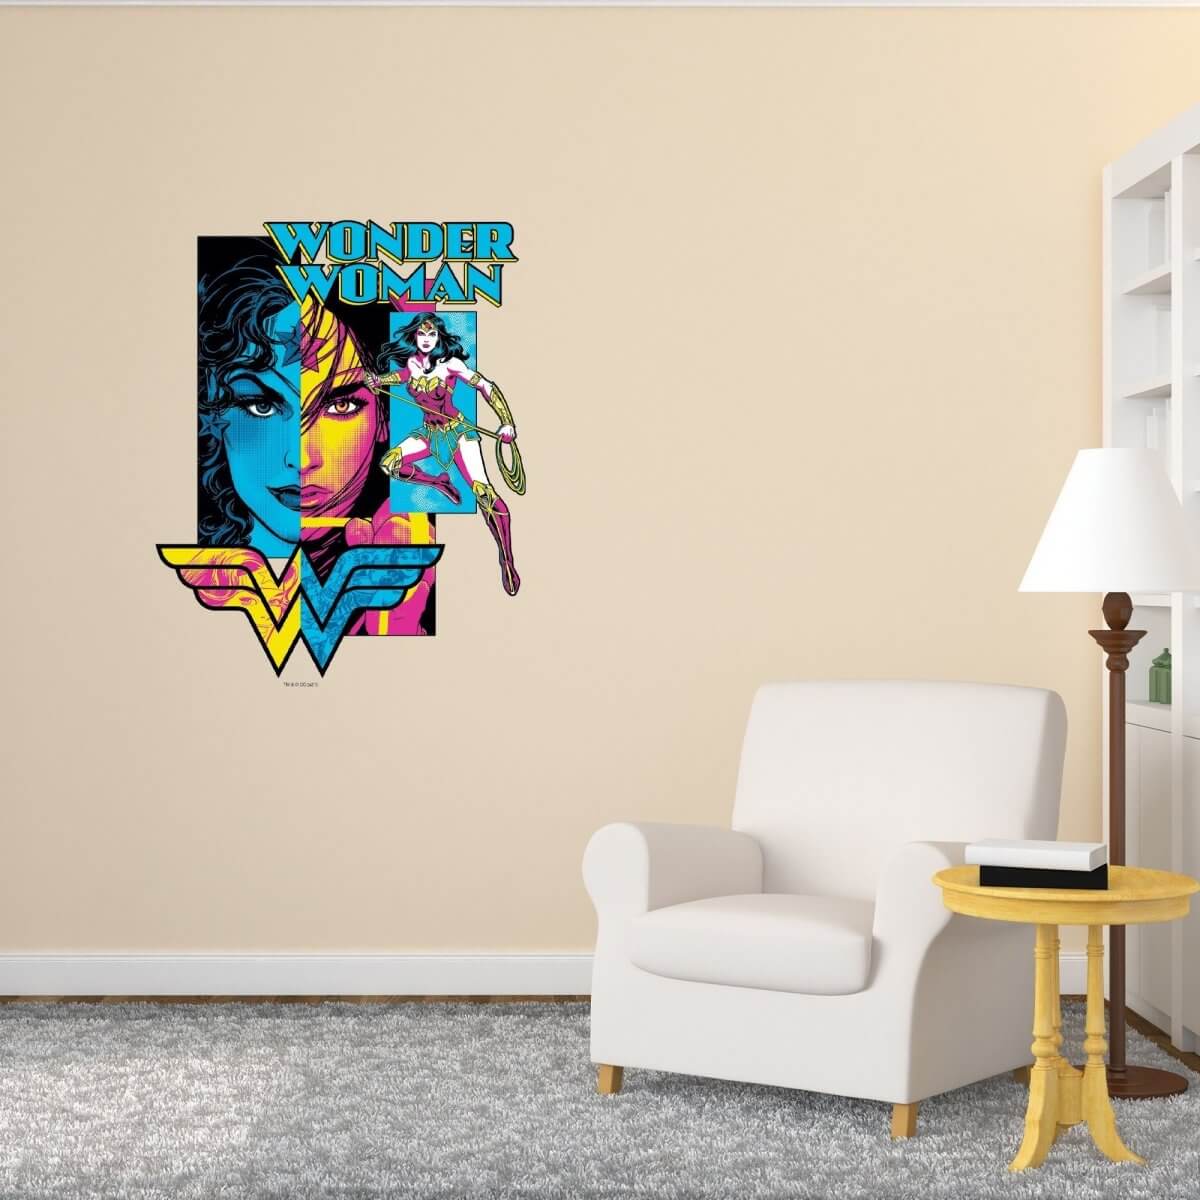 Kismet Decals Wonder Woman Portrait + Battle ready Officially Licensed Wall Sticker - Easy DIY DC Comics Home, Kids or Adult Bedroom, Office, Living Room Decor Wall Art - Kismet Decals